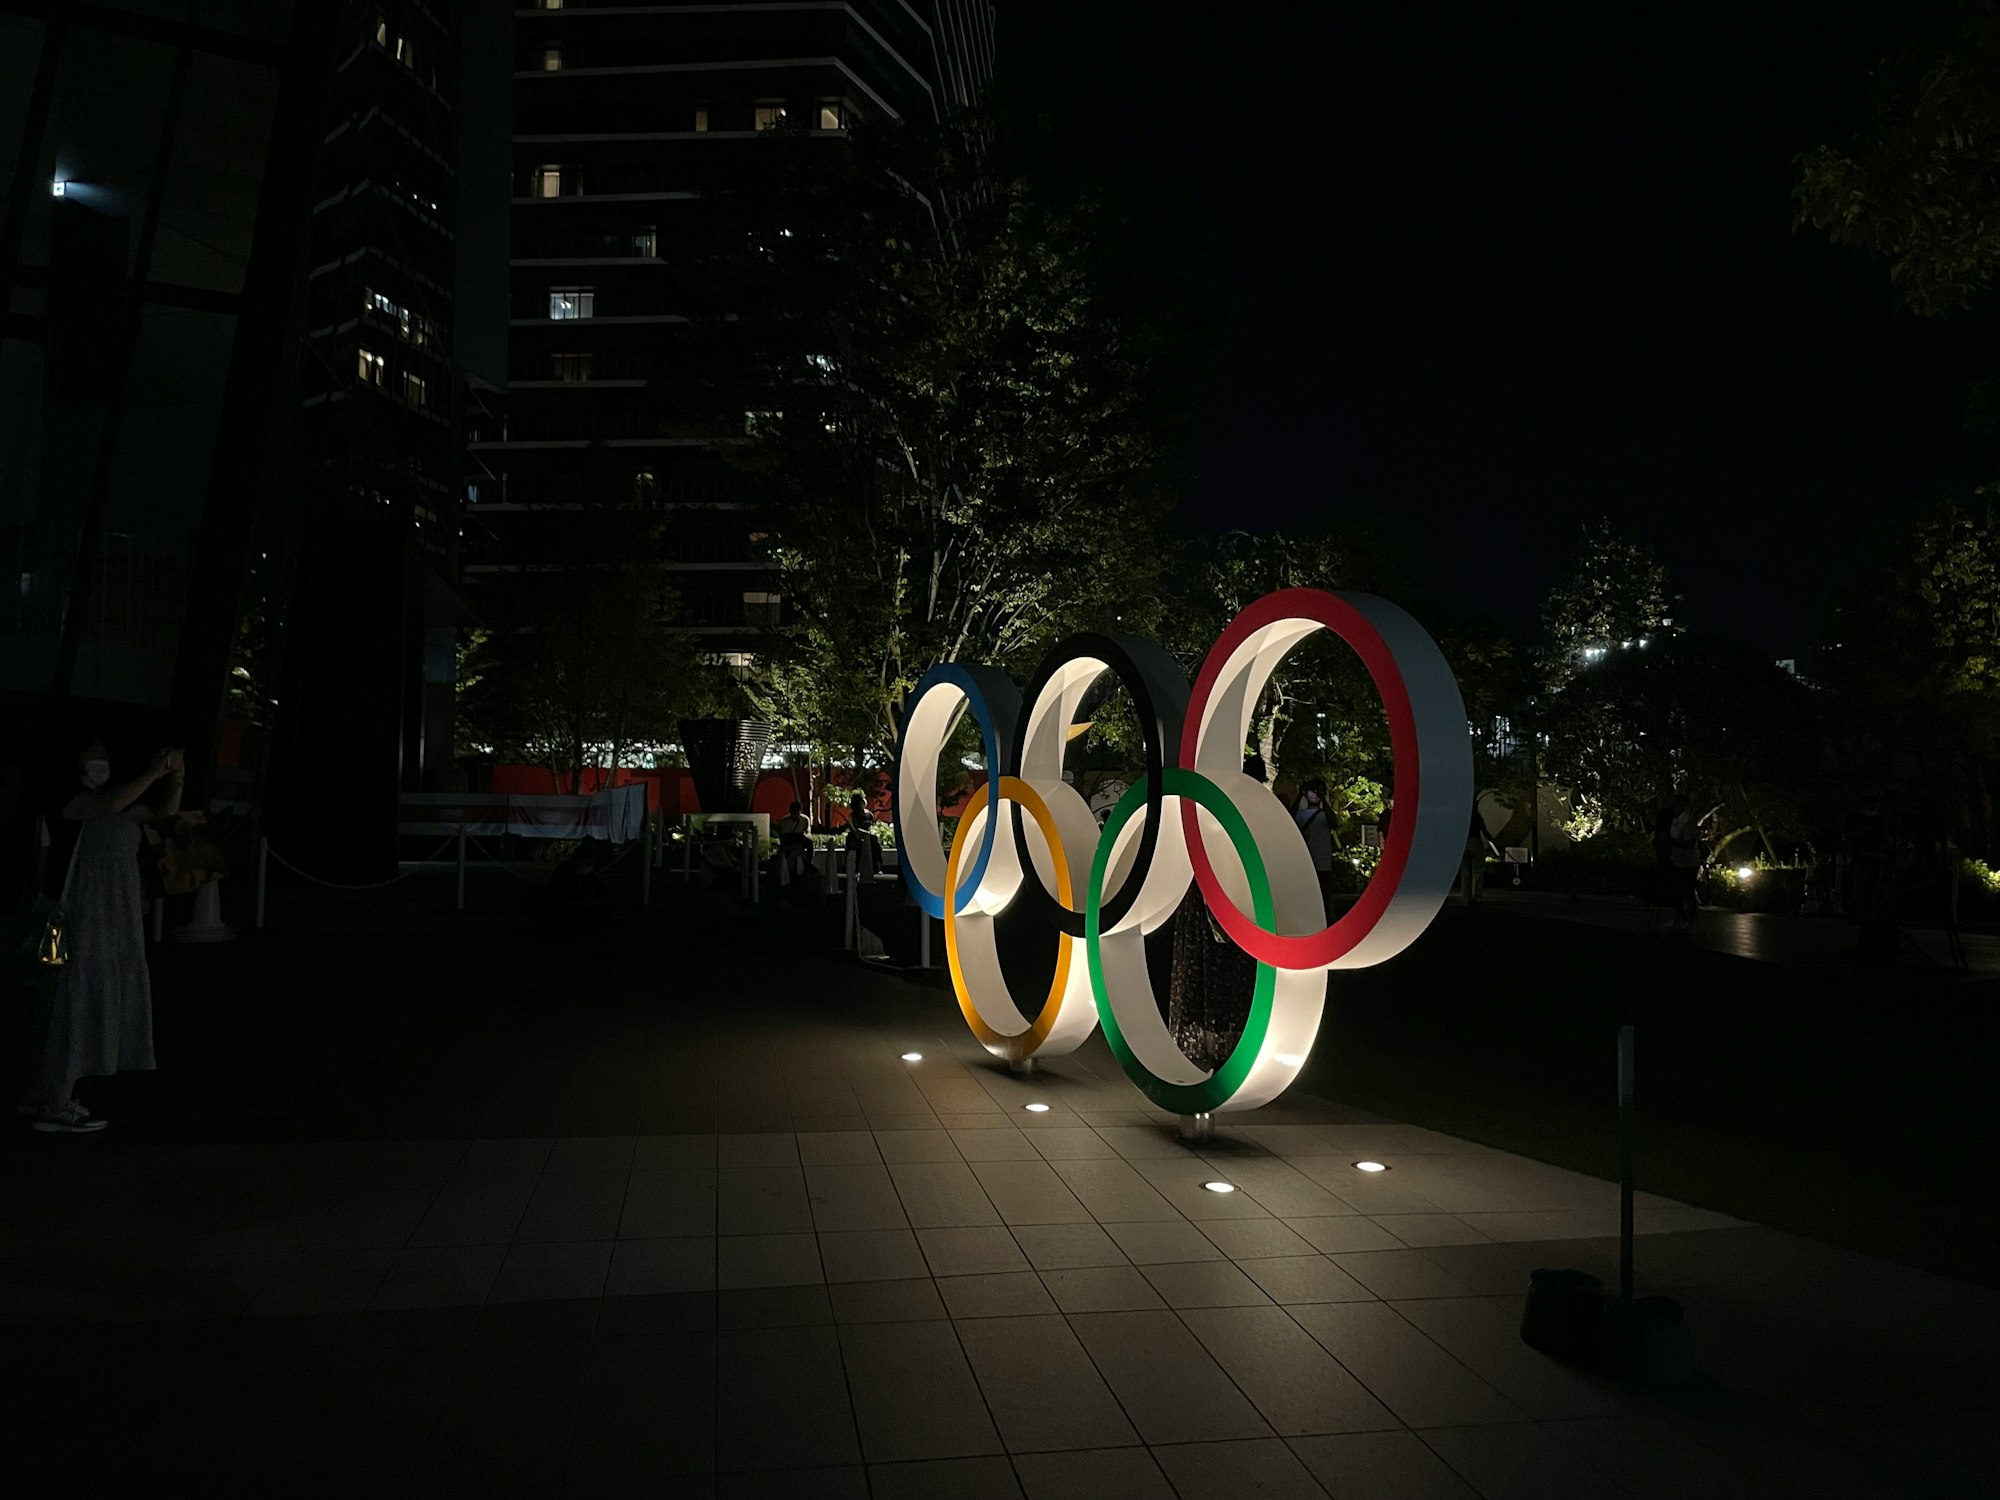 Which City Hosted The Very First Olympics In The USA?